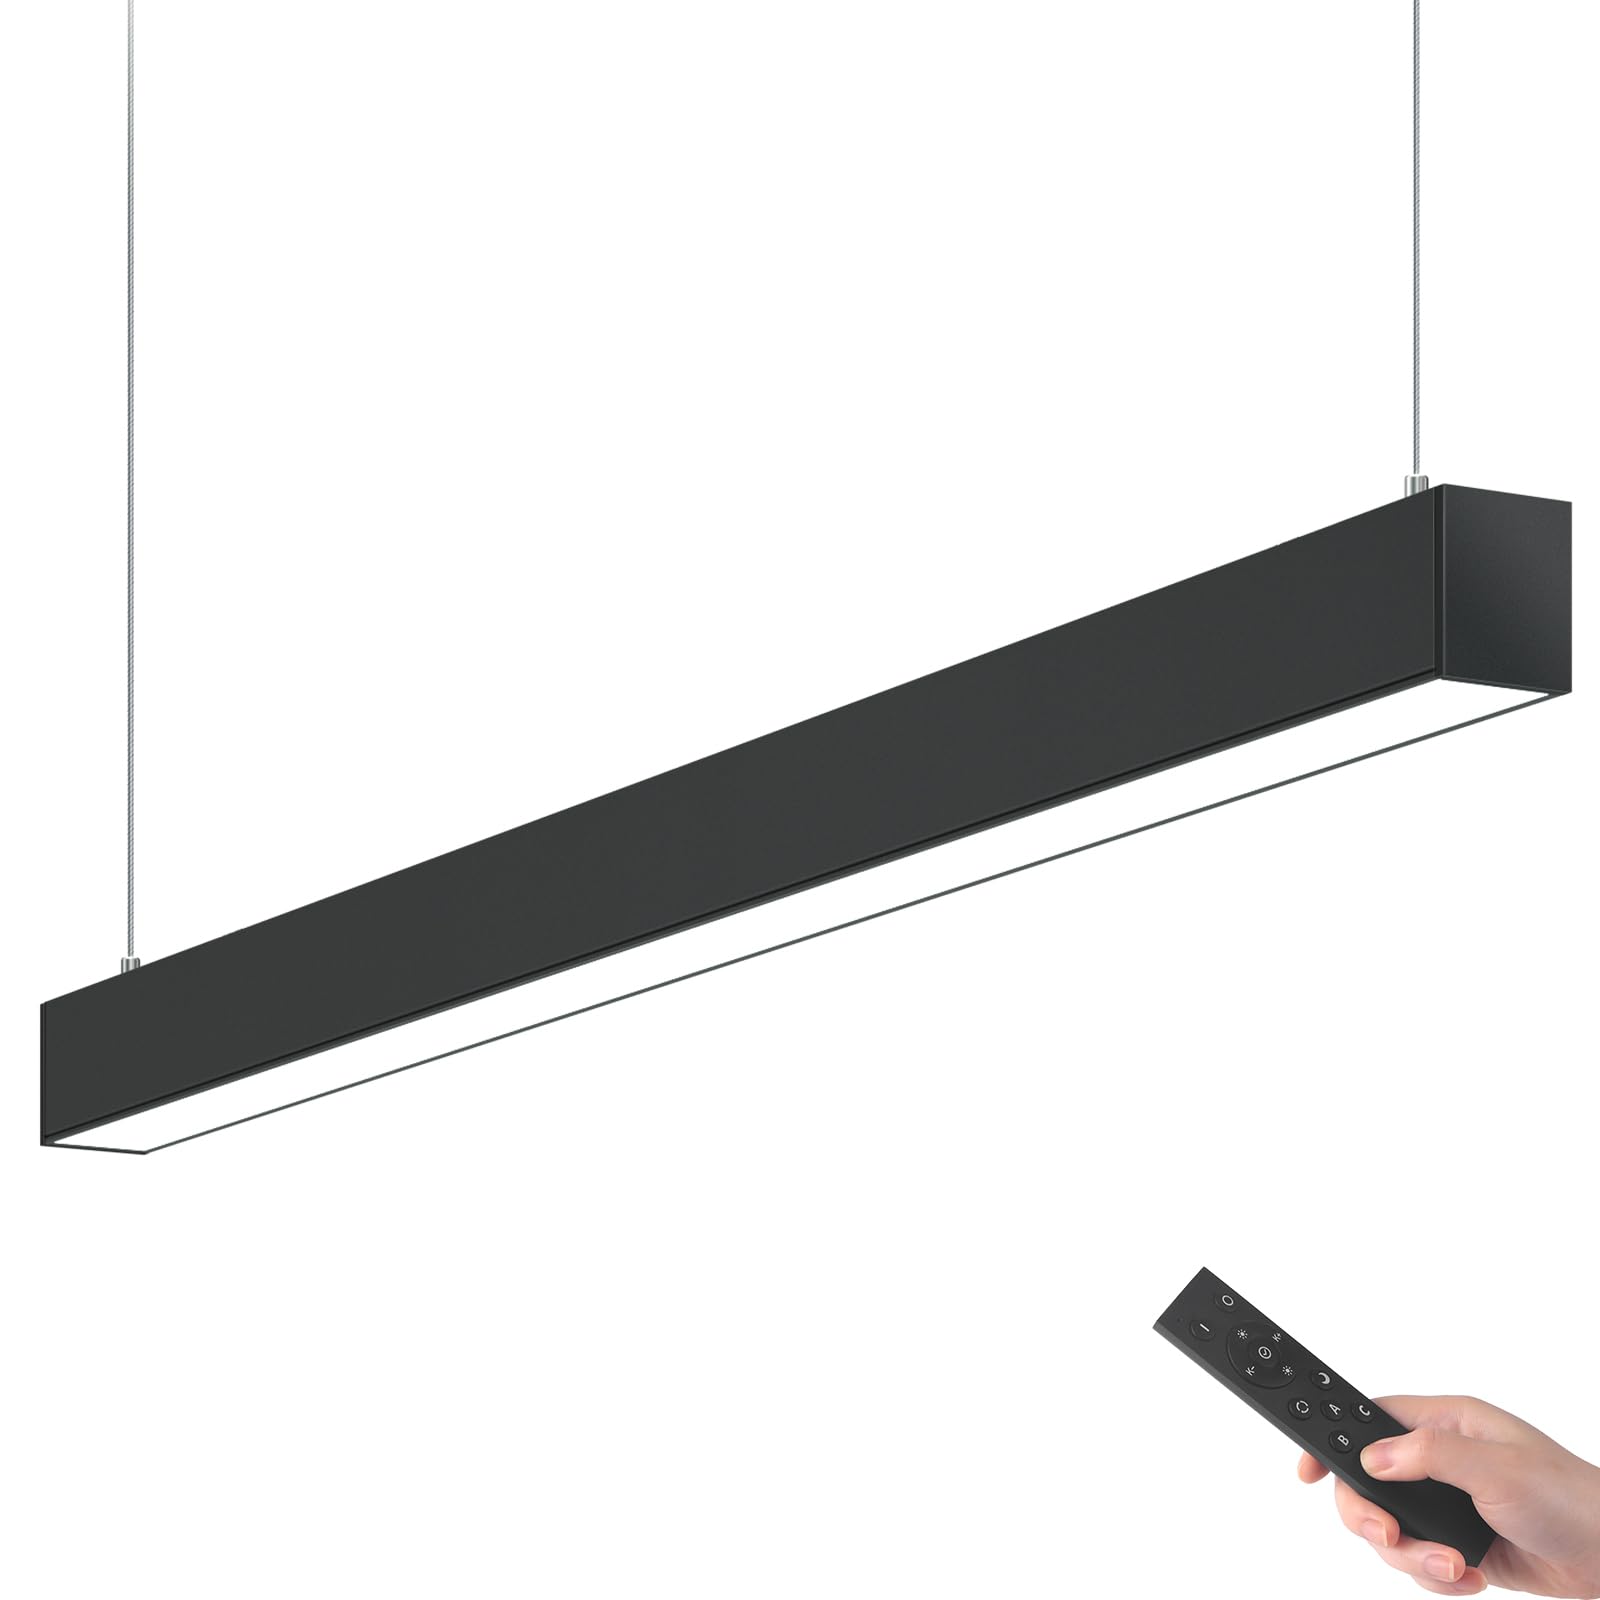 5568 Linear Light with Remote,4FT,45W,3000K to 6000K,1 Pack,Black,XA5L45(H) - Barrina led